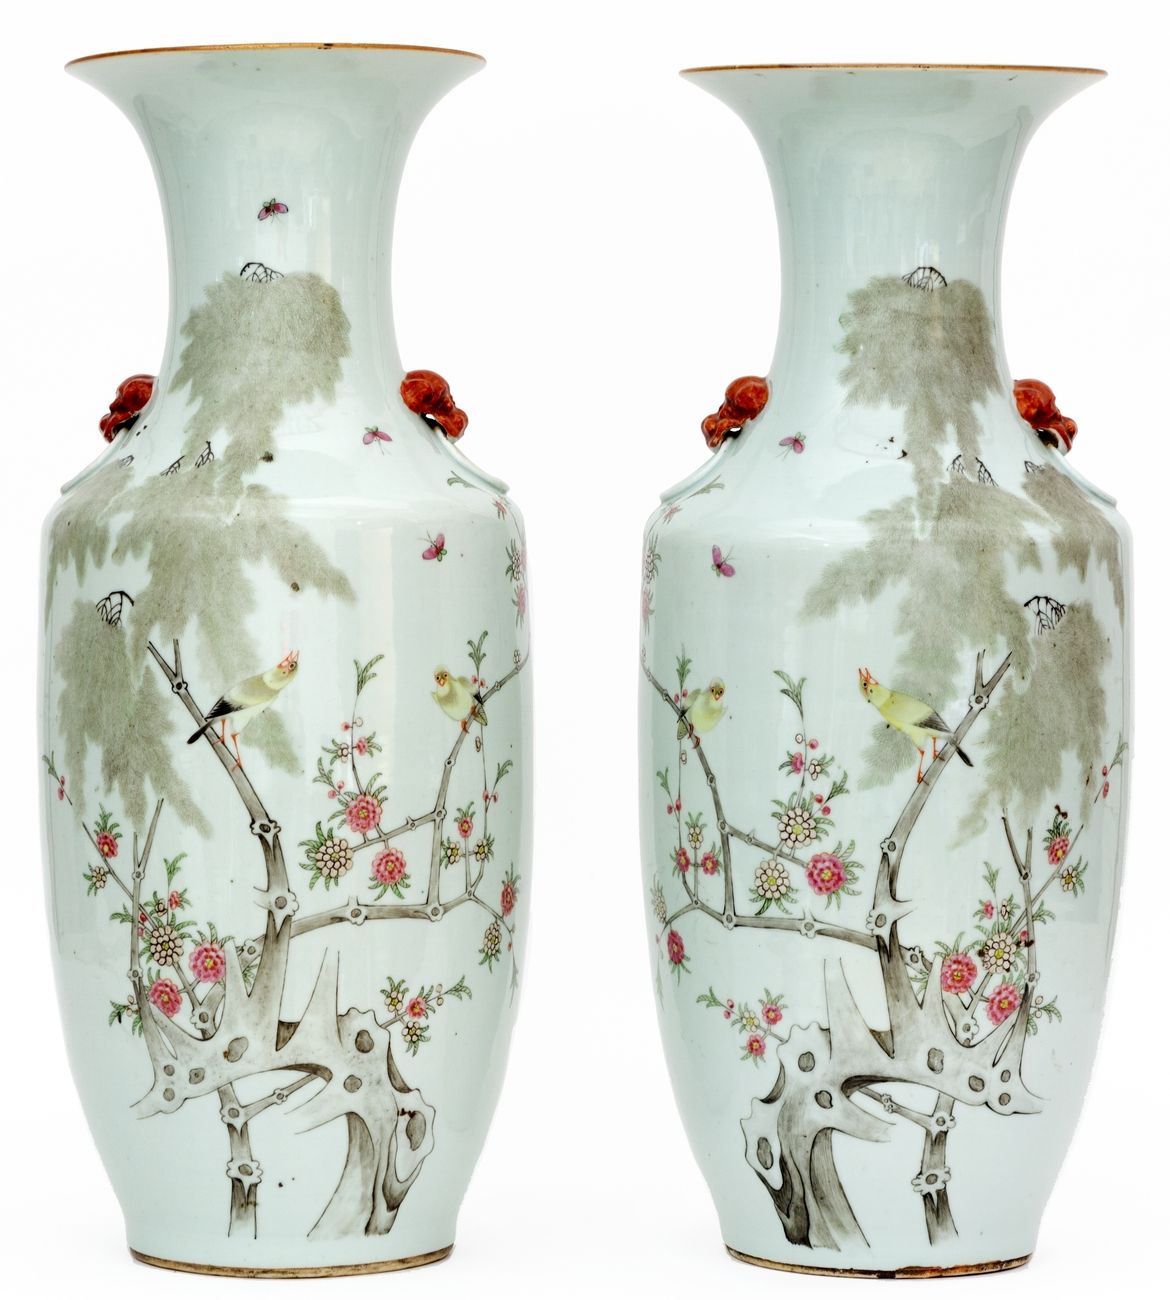 Null China, XIX-XXth century
A pair of porcelain vases decorated with polychrome&hellip;